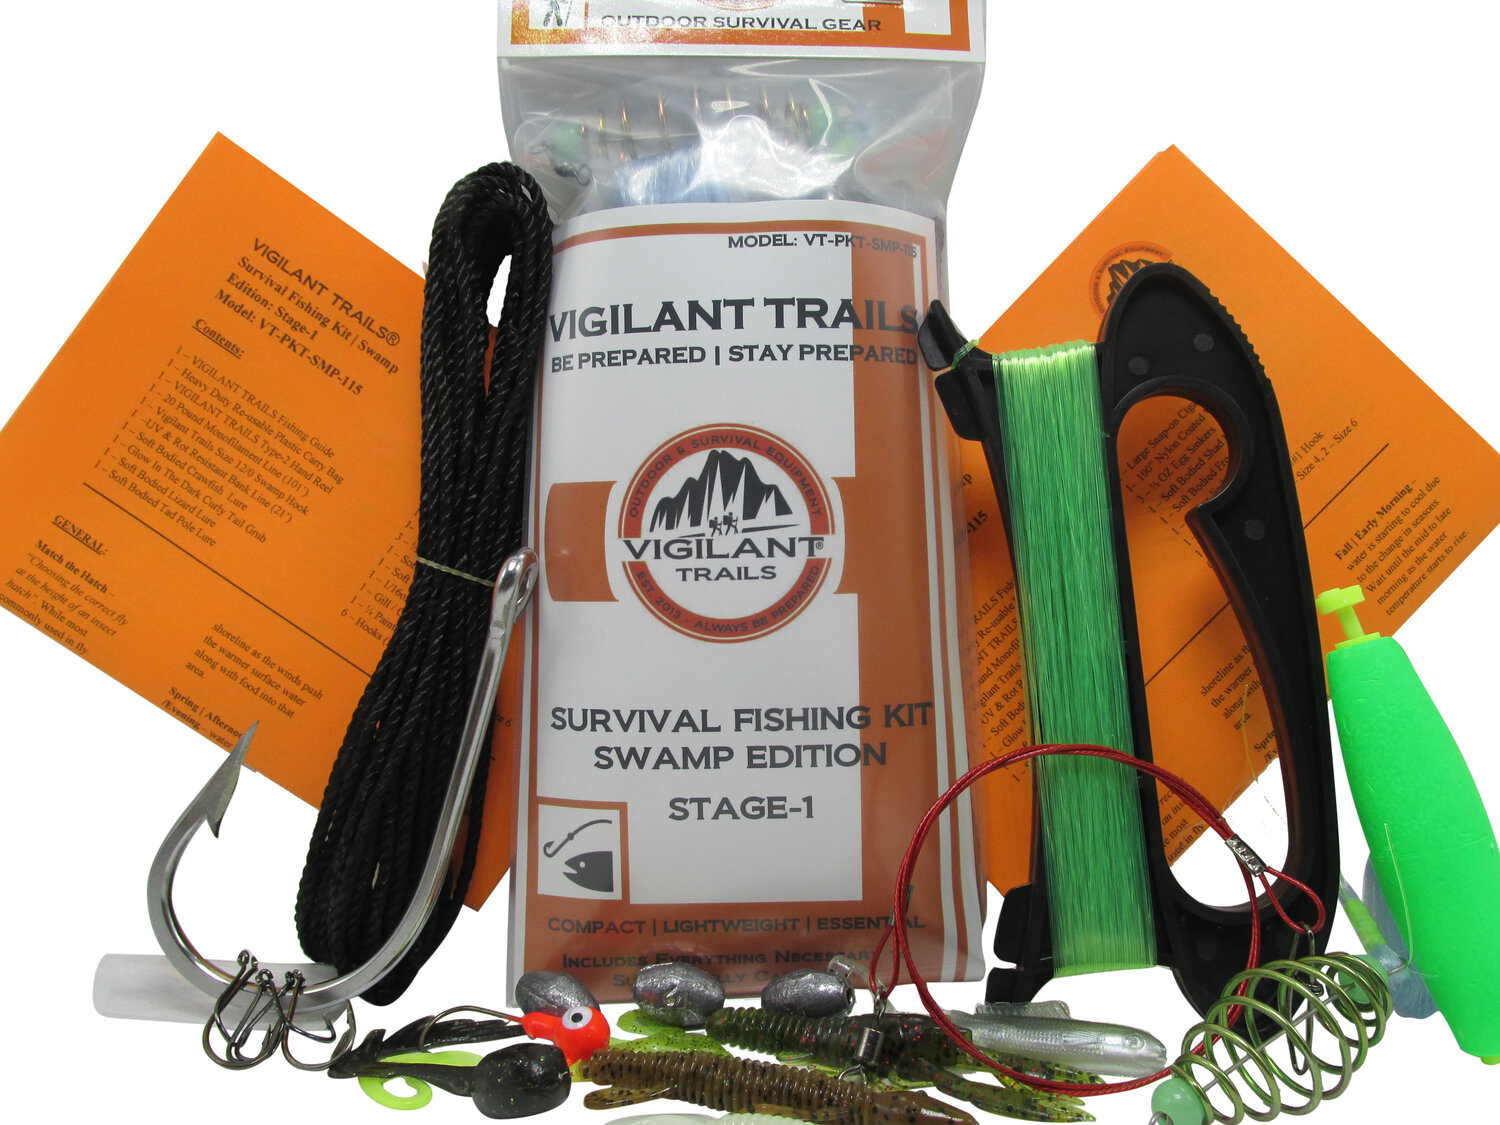 Survival Fishing Kit • See what contents to carry and how to use